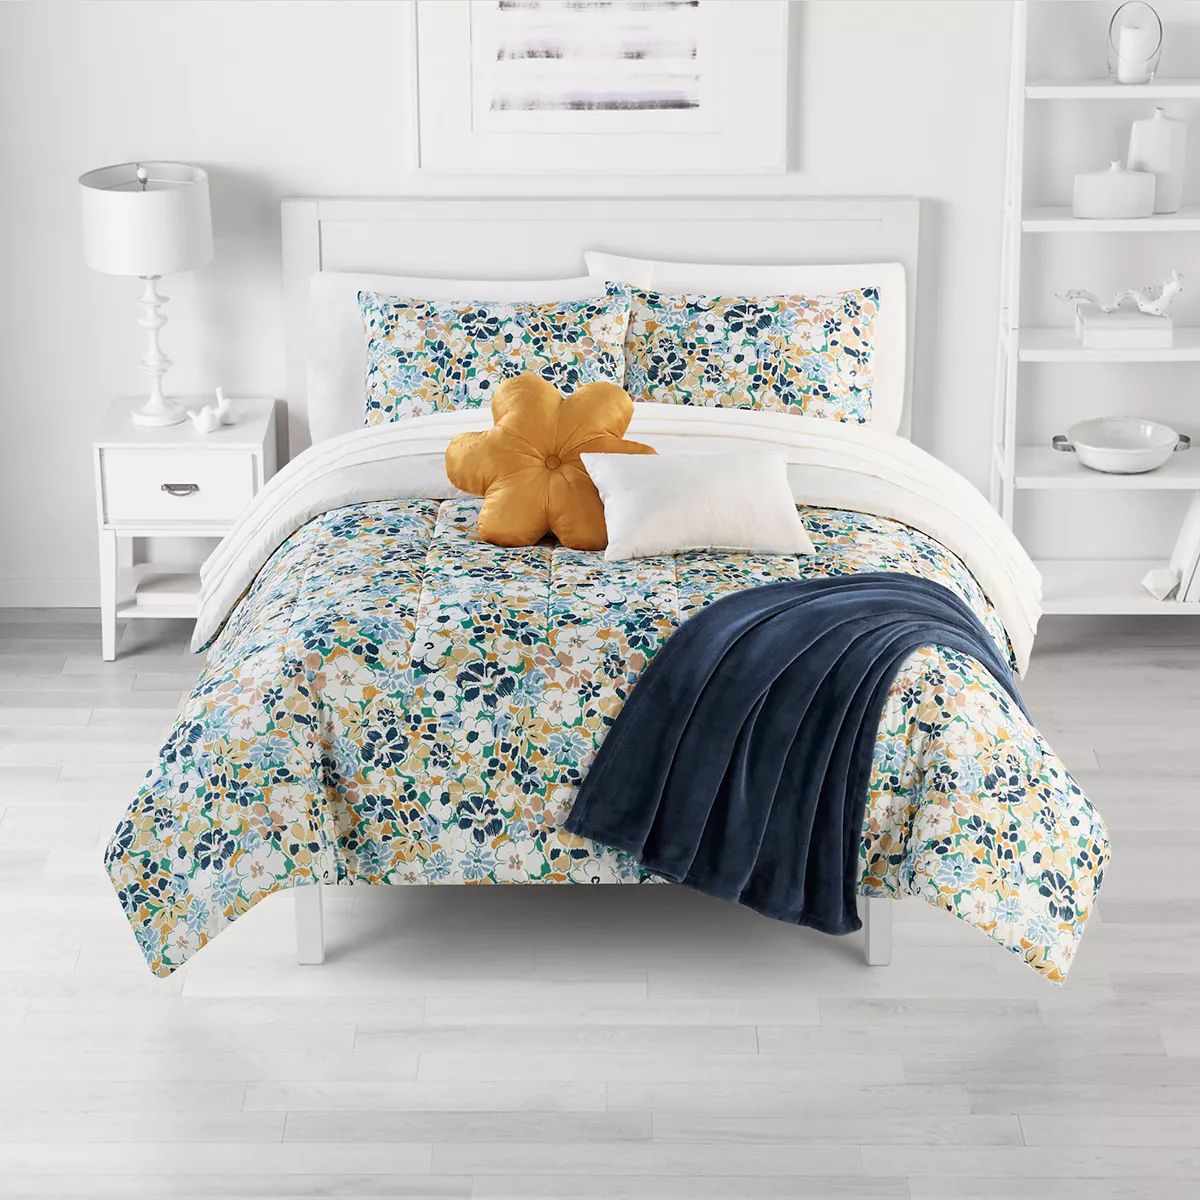 The Big One® Harper Reversible Comforter Set with Sheets, Throw & Decorative Pillows | Kohl's